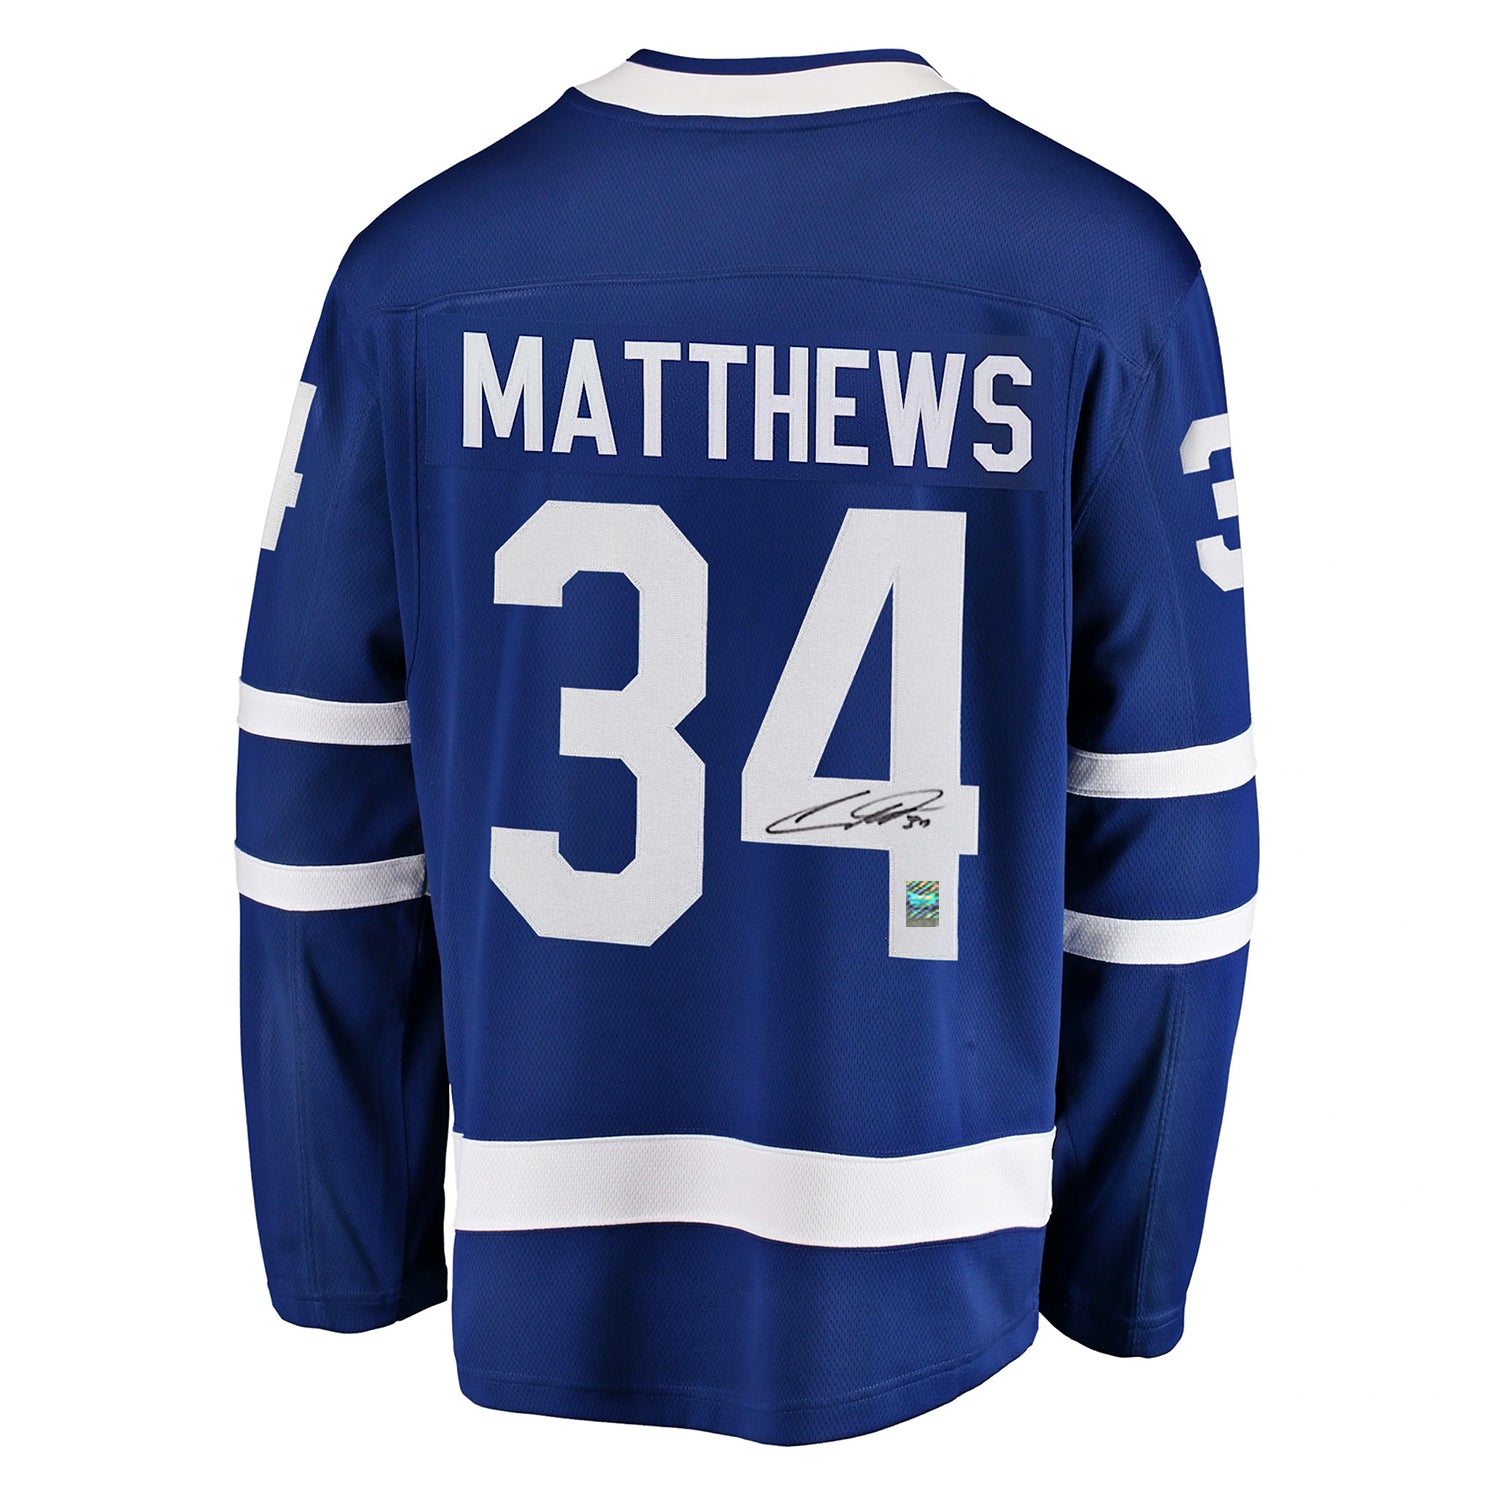 Mitch Marner Autographed Toronto Maple Leafs St. Pats Jersey